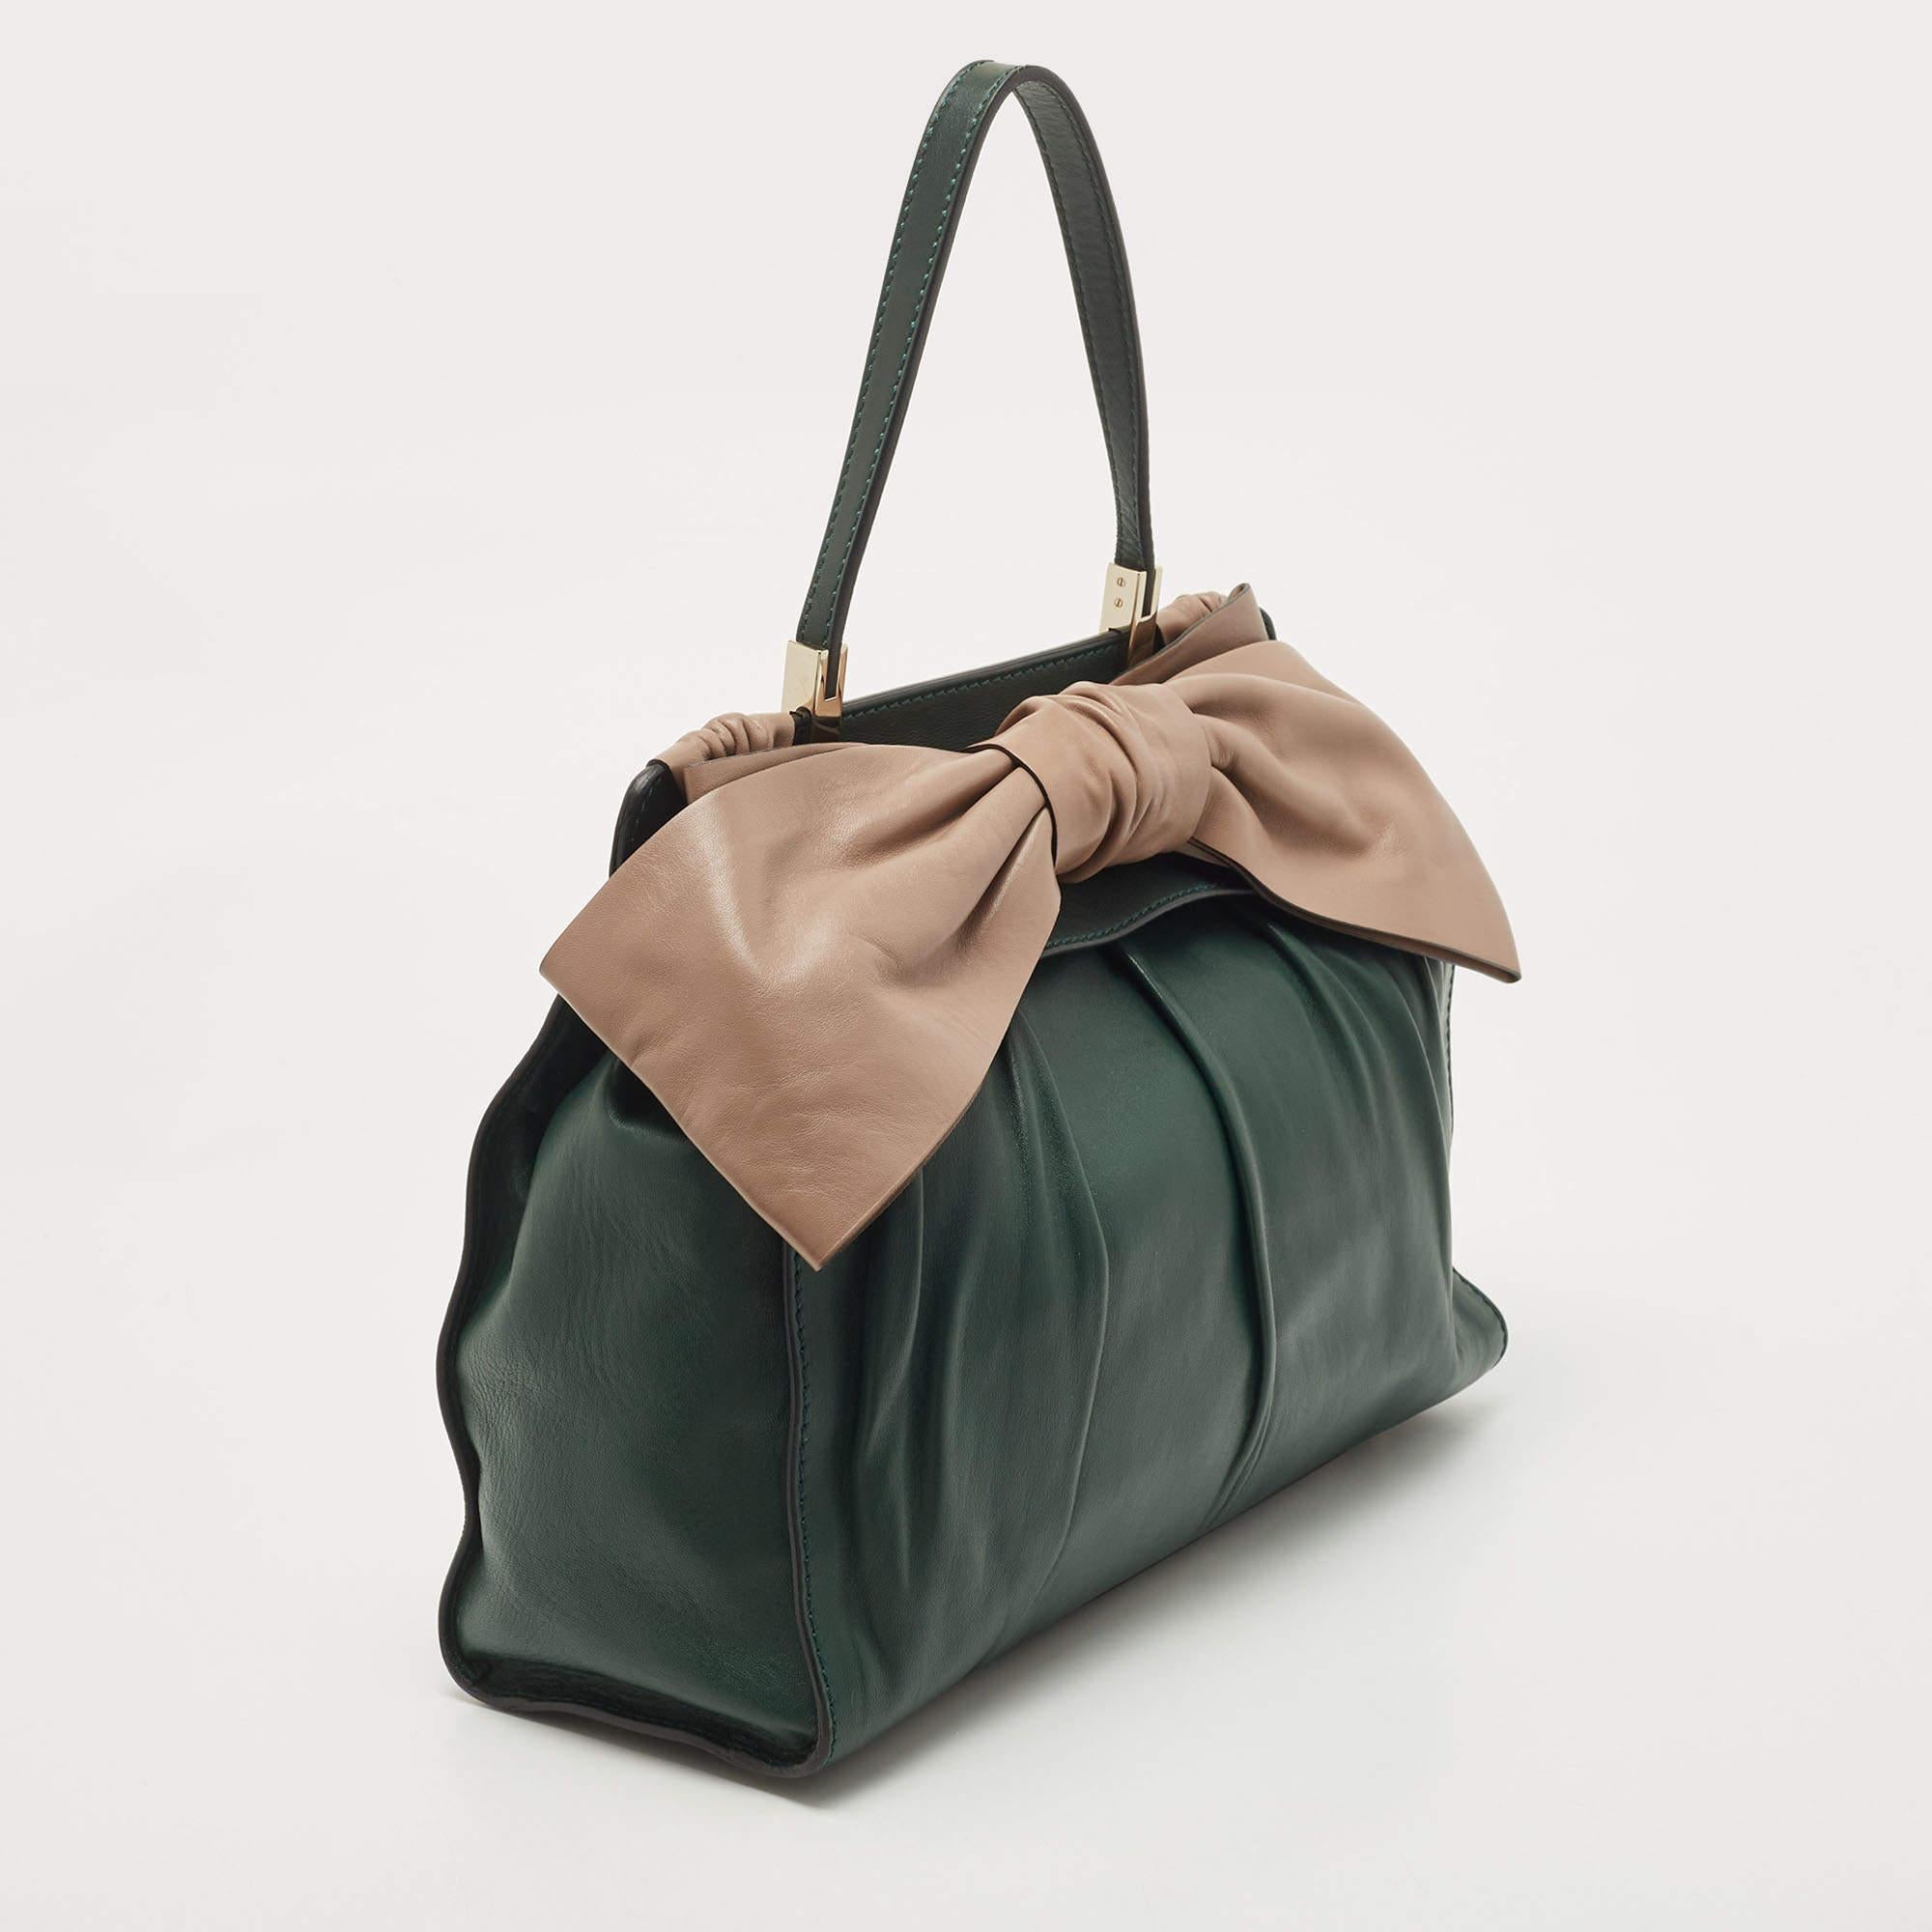 Imparting unparalleled elegance and sophistication, this designer bag is made from quality leather in a gorgeous hue. While the interior offers ample space, the top handle allows you to carry it with much style.
included
Original Dustbag, Info